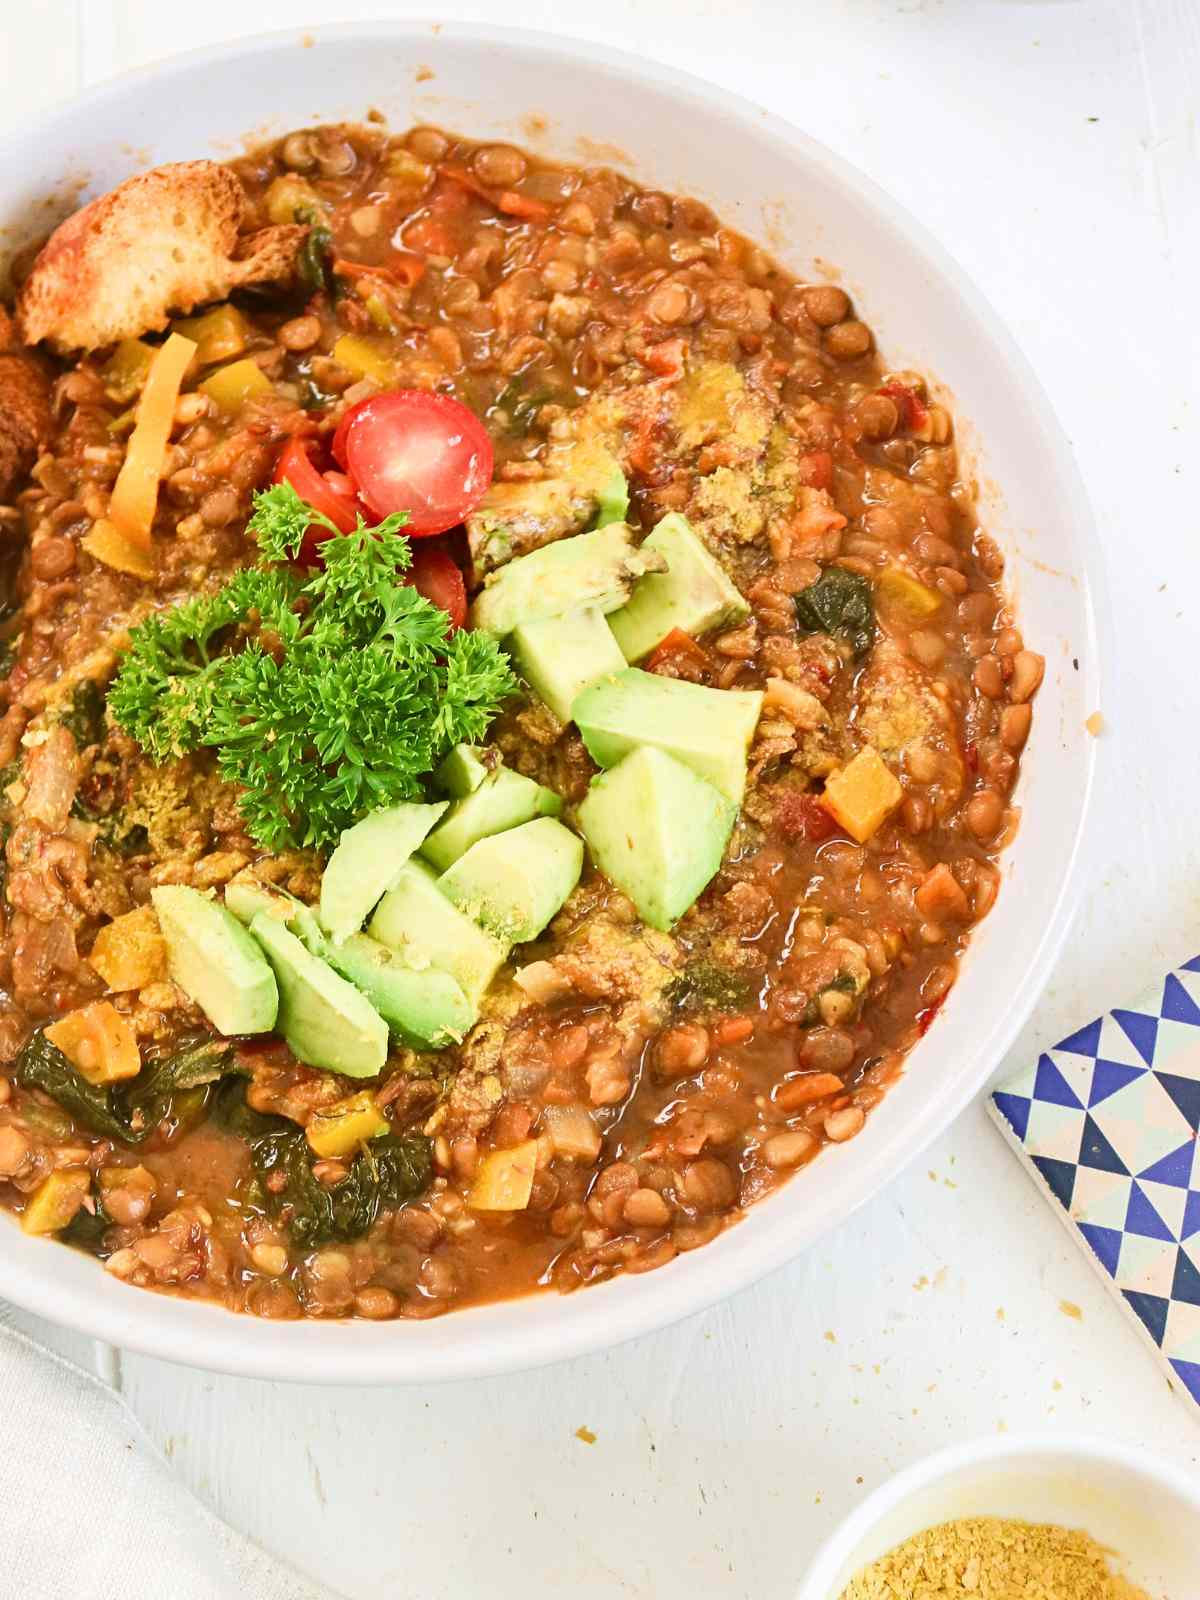 Lentil stew served in a bowl topped with avocado, parsley and cherry tomatoes.